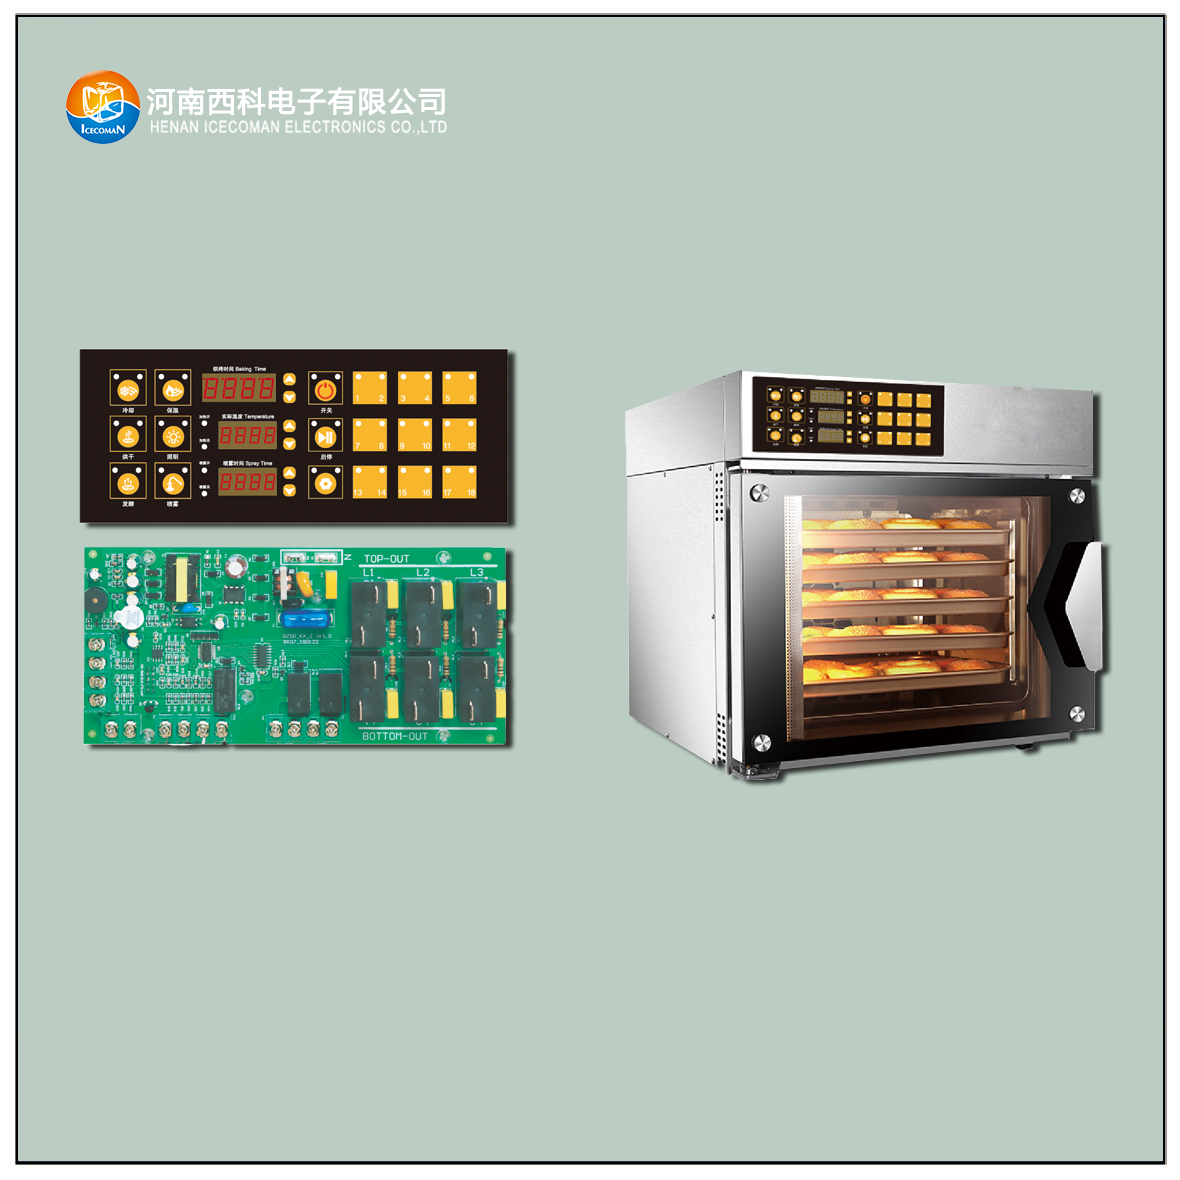 Hpkx-smg-b baking oven controller